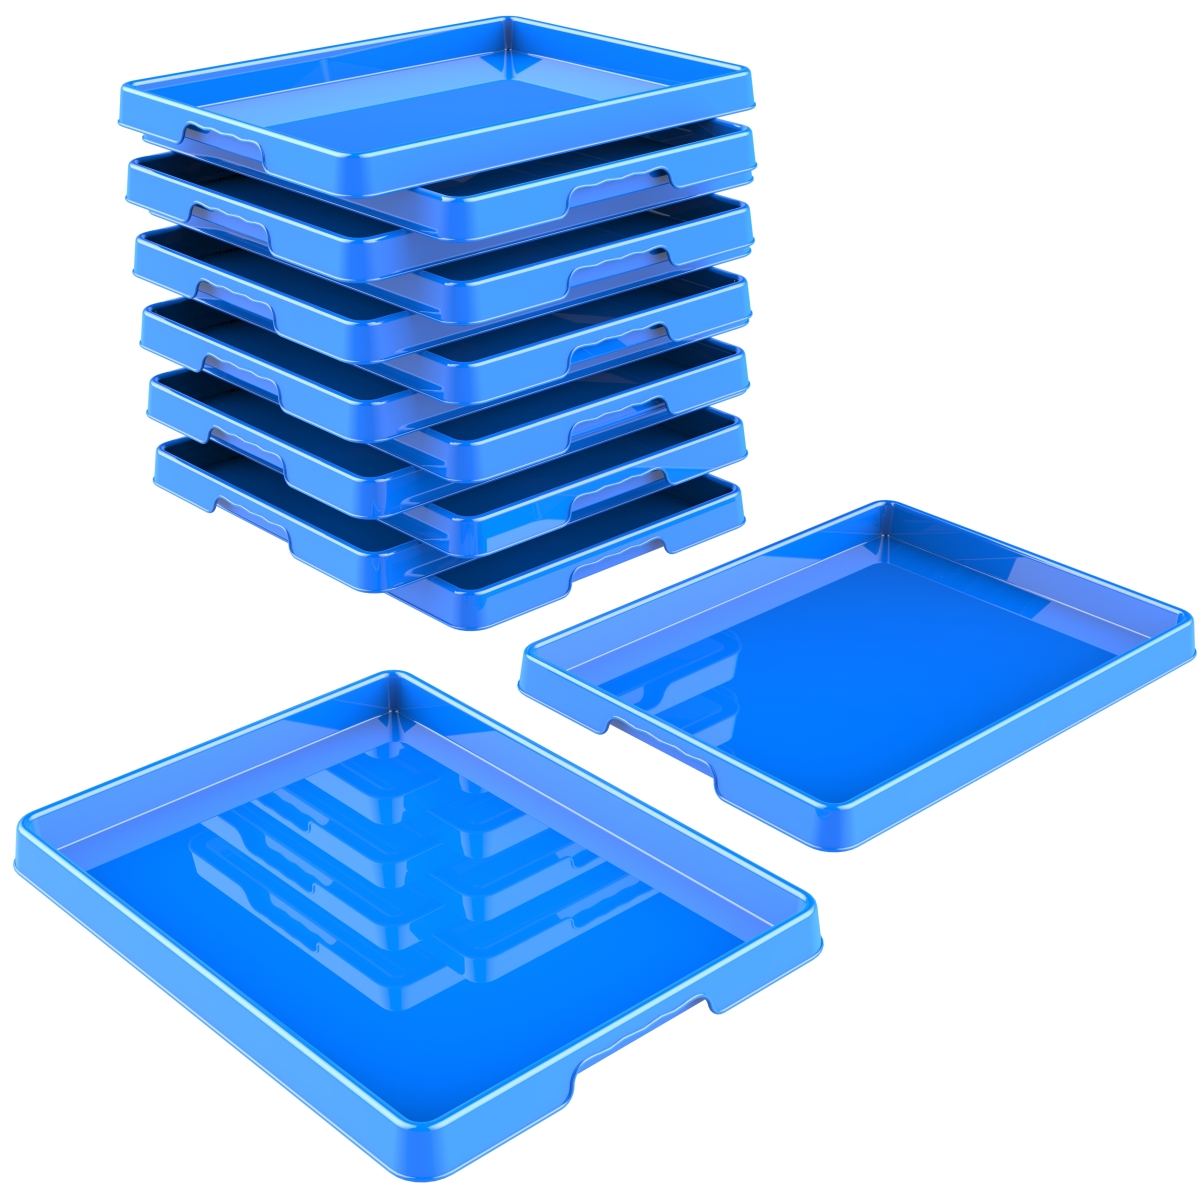 00441e12c 12 X 16 In. Sorting & Crafts Tray, Blue - Pack Of 12